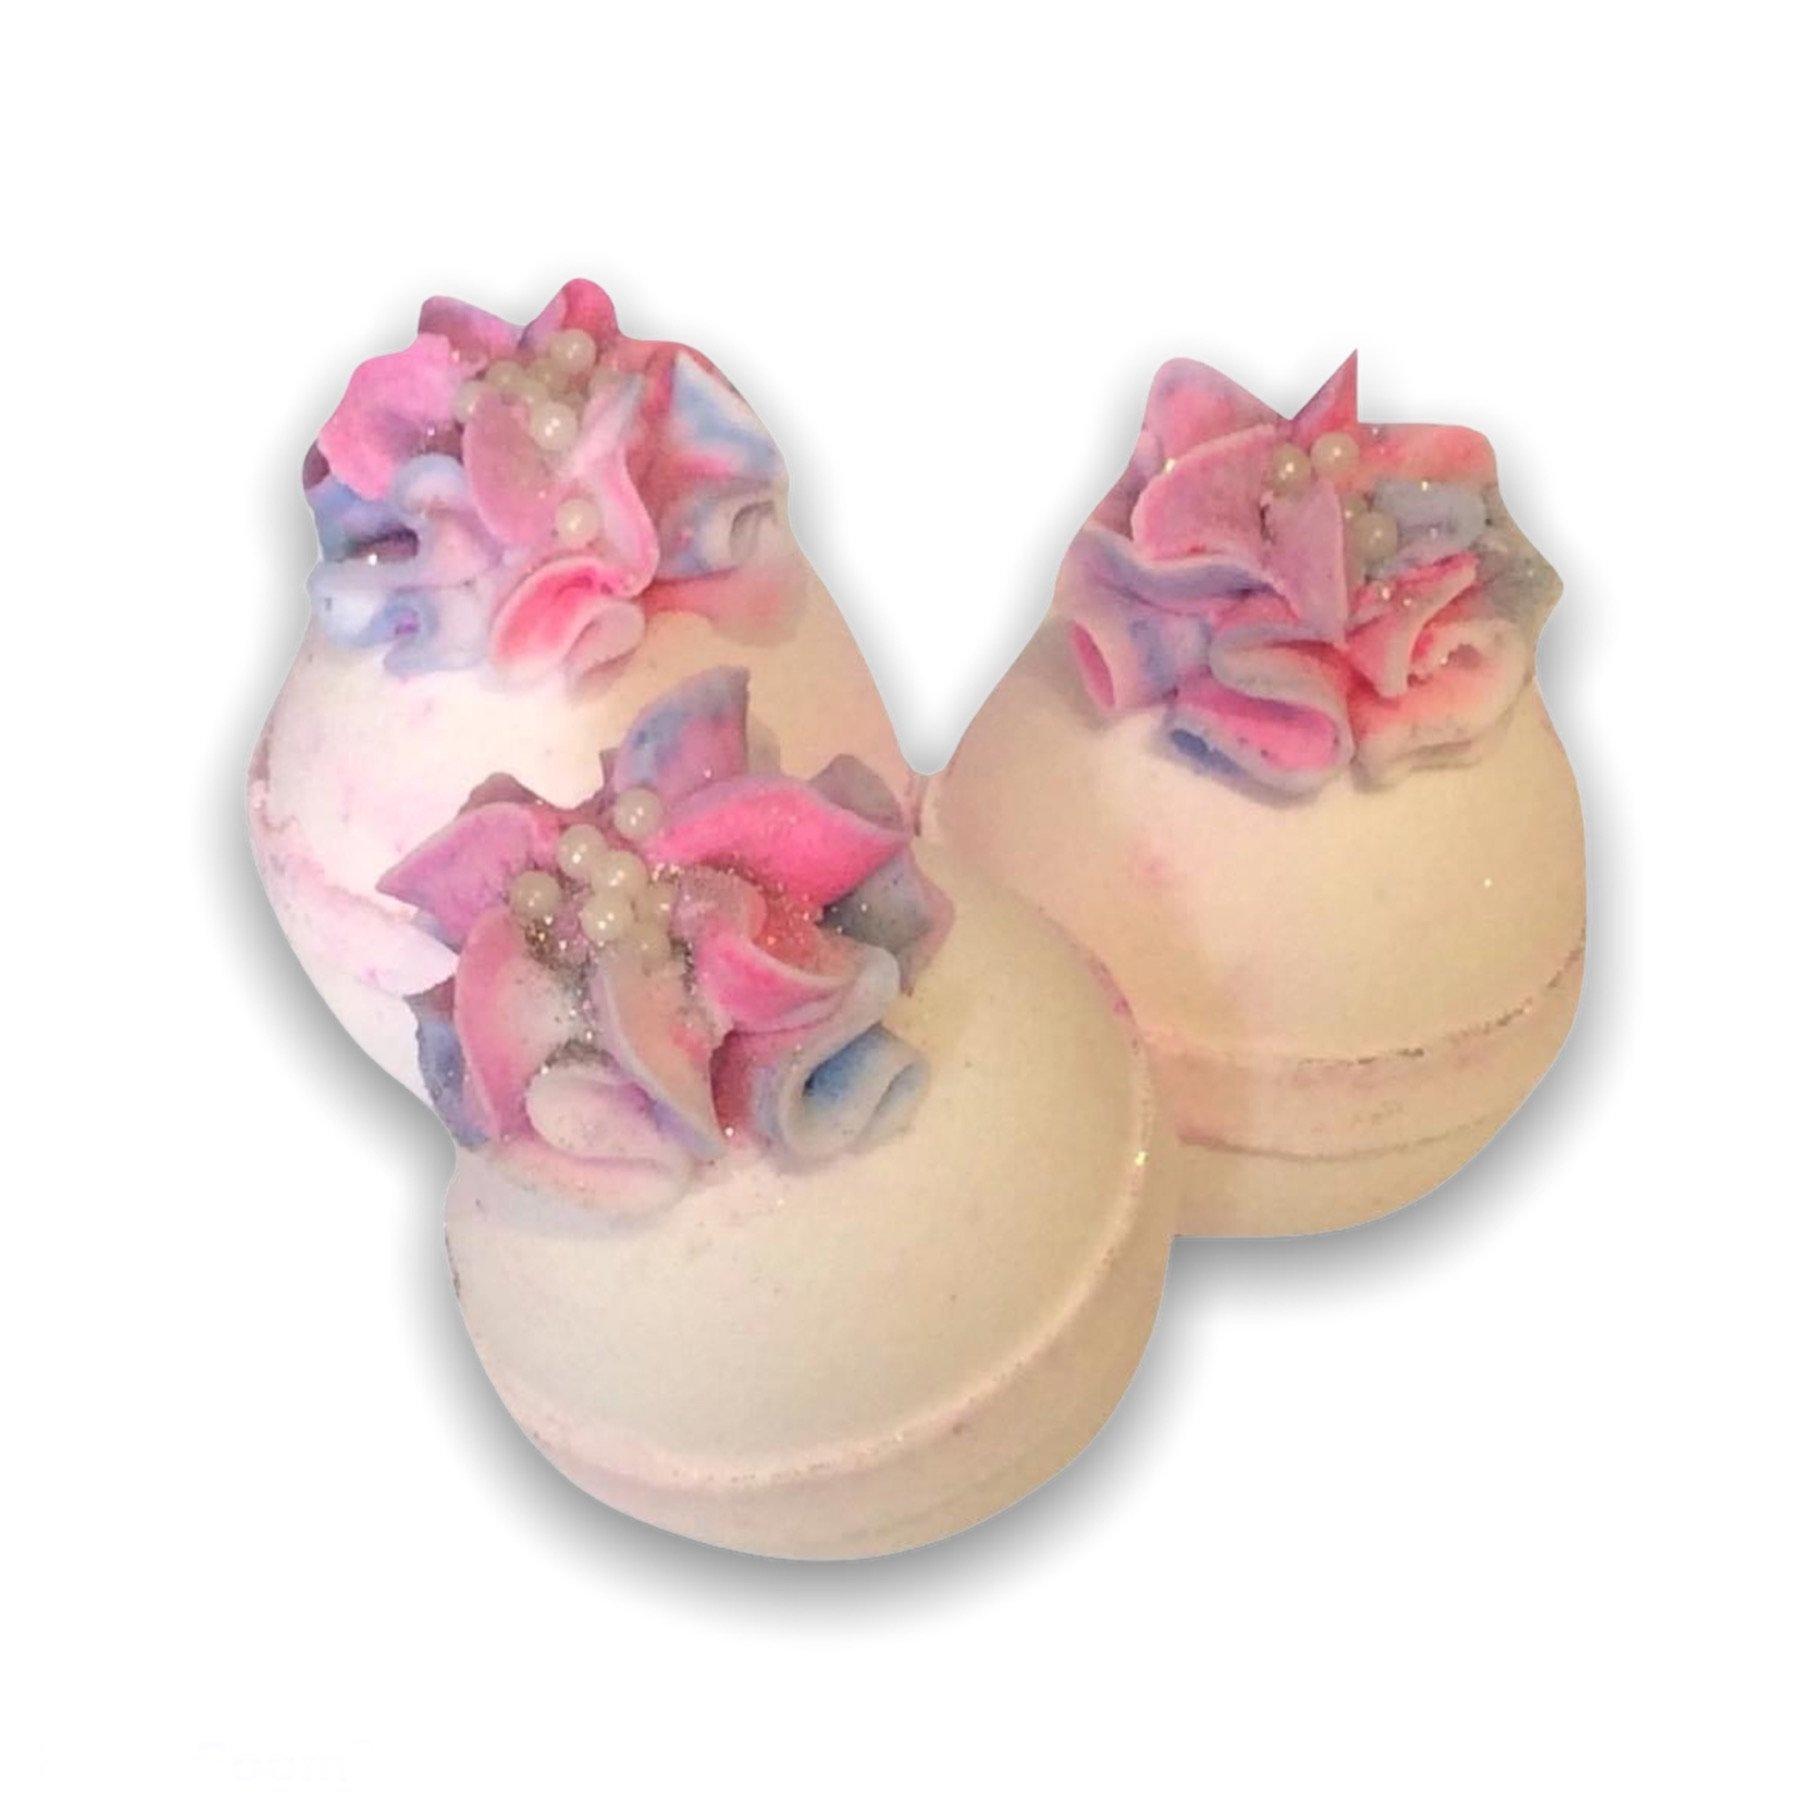 3 Baby Powder bath bombs, in the colour of pink and purple.